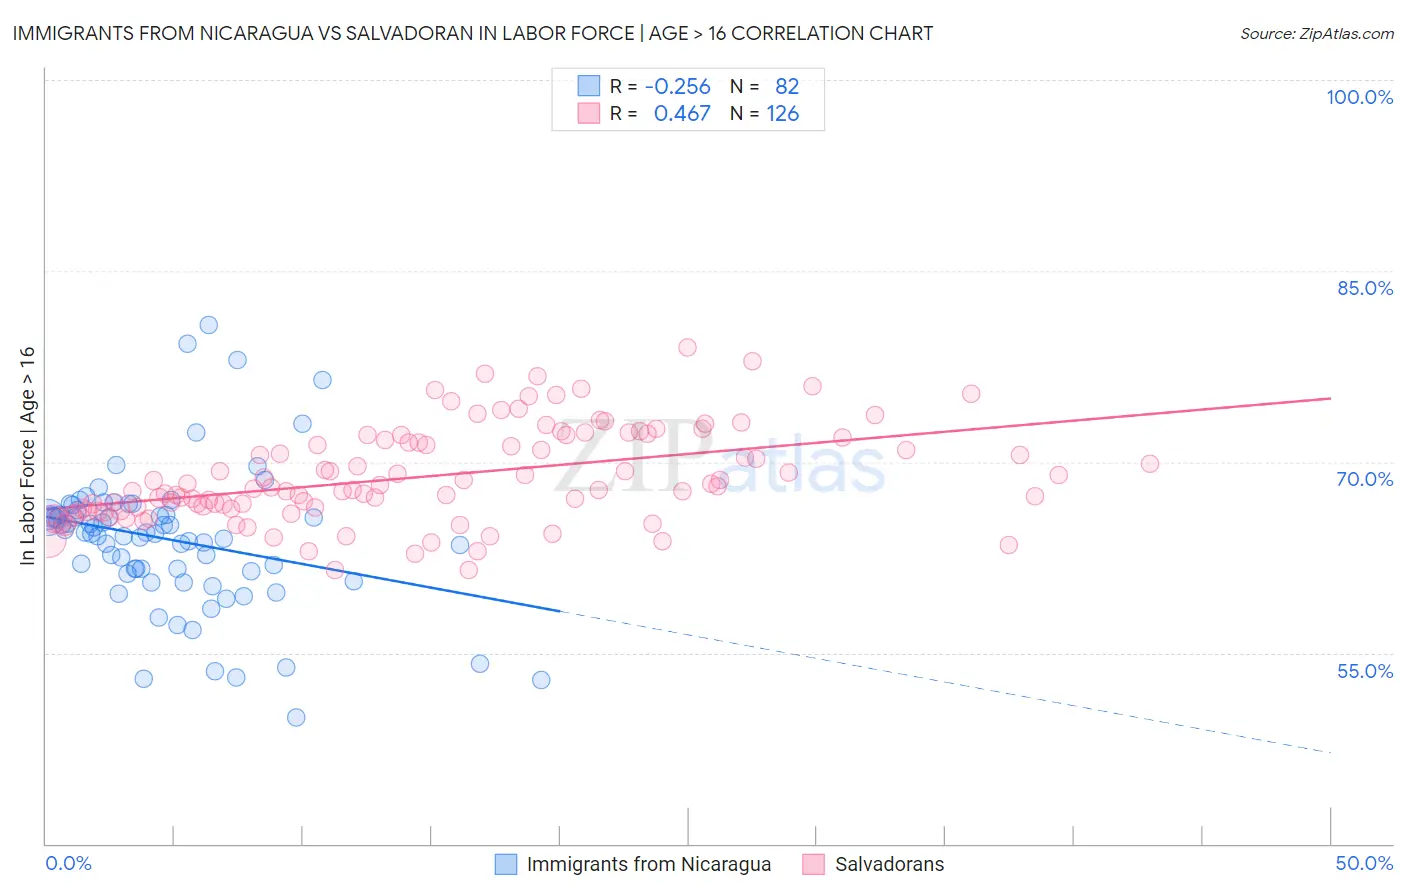 Immigrants from Nicaragua vs Salvadoran In Labor Force | Age > 16